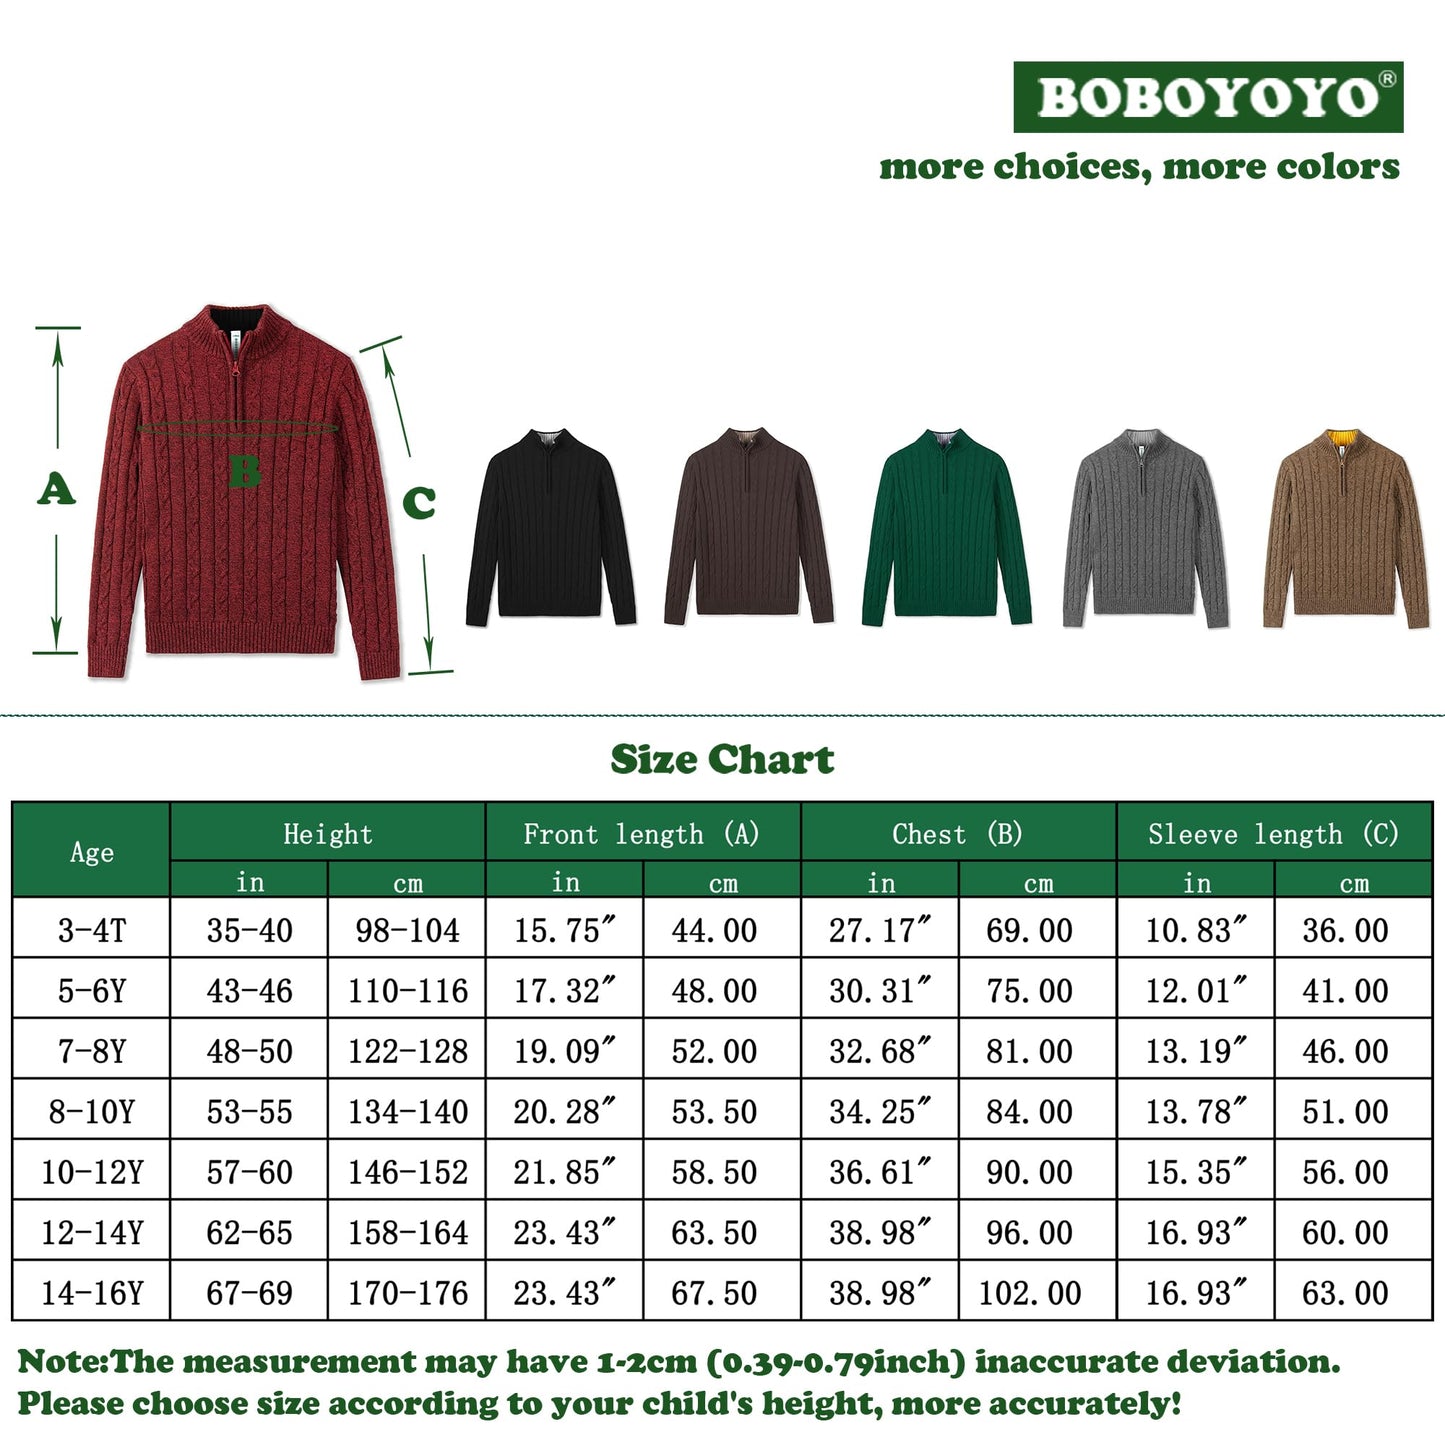 BOBOYOYO Boys Sweater Qurter Zip Pullover 100% Cotton Cable Knit Sweater Turtleneck for Kids 3-16 Years